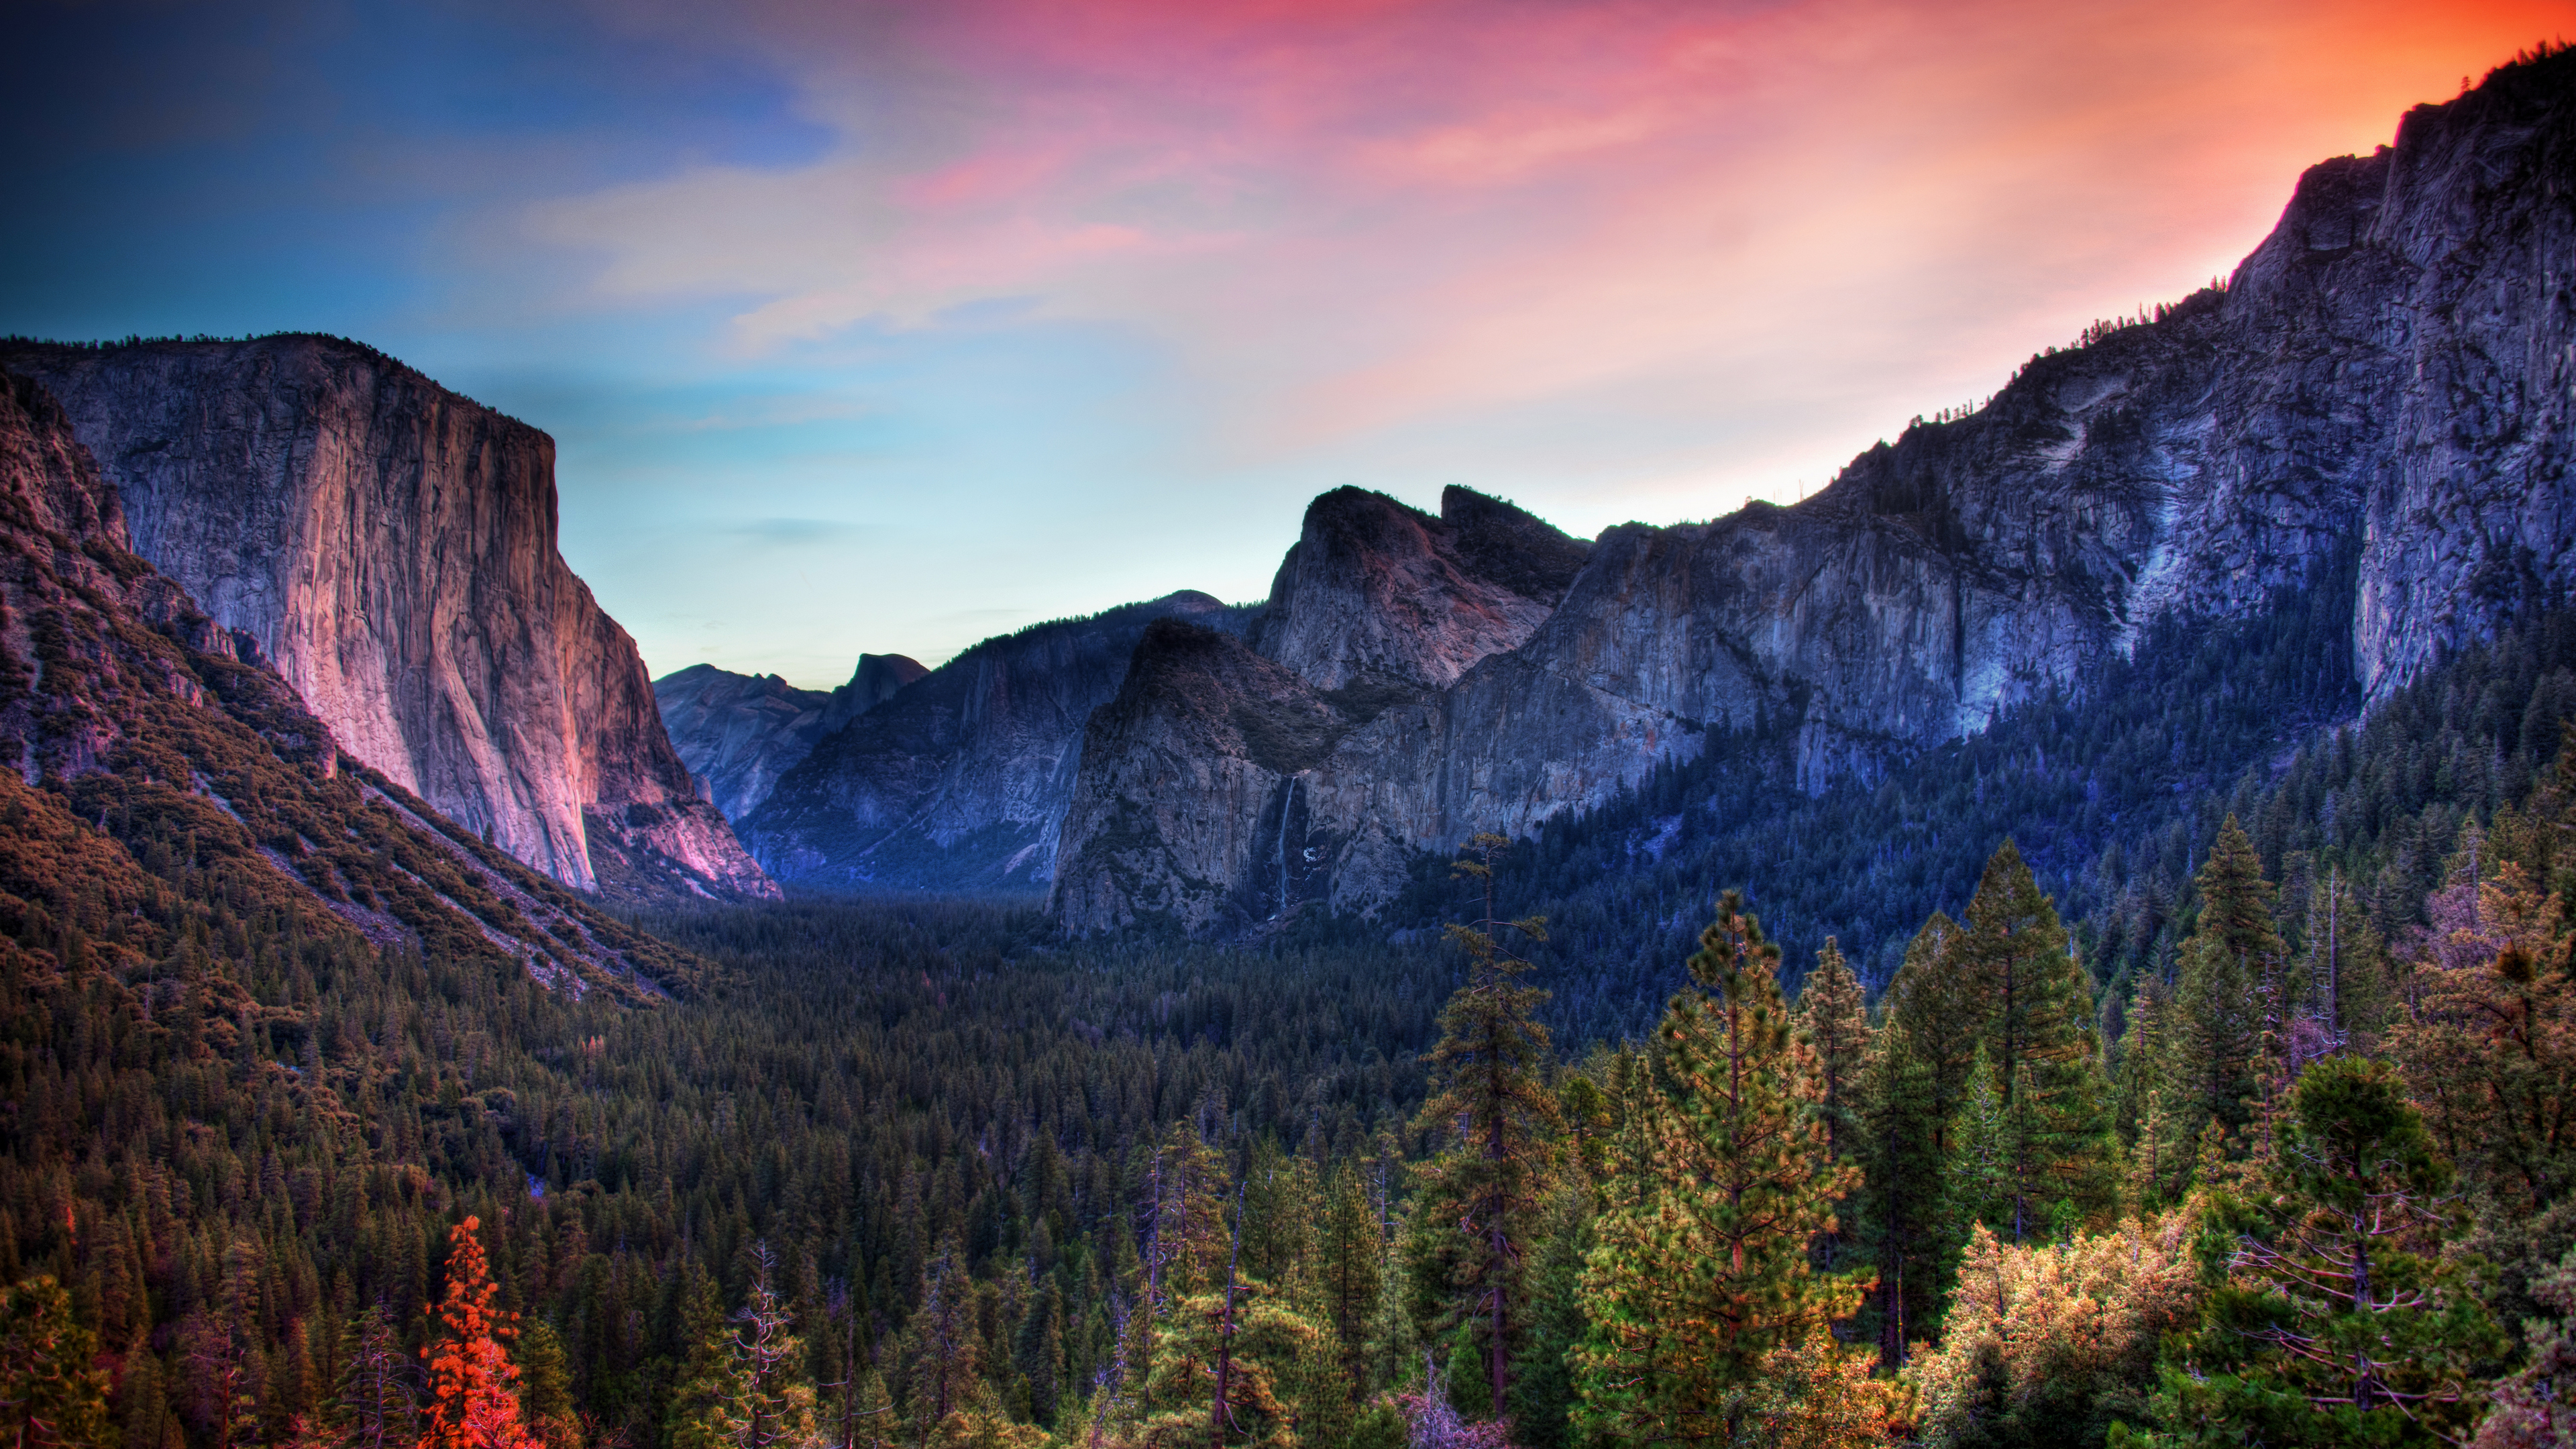 General 3840x2160 Trey Ratcliff 4K photography California nature forest mountains sky sunset glow trees Yosemite Valley